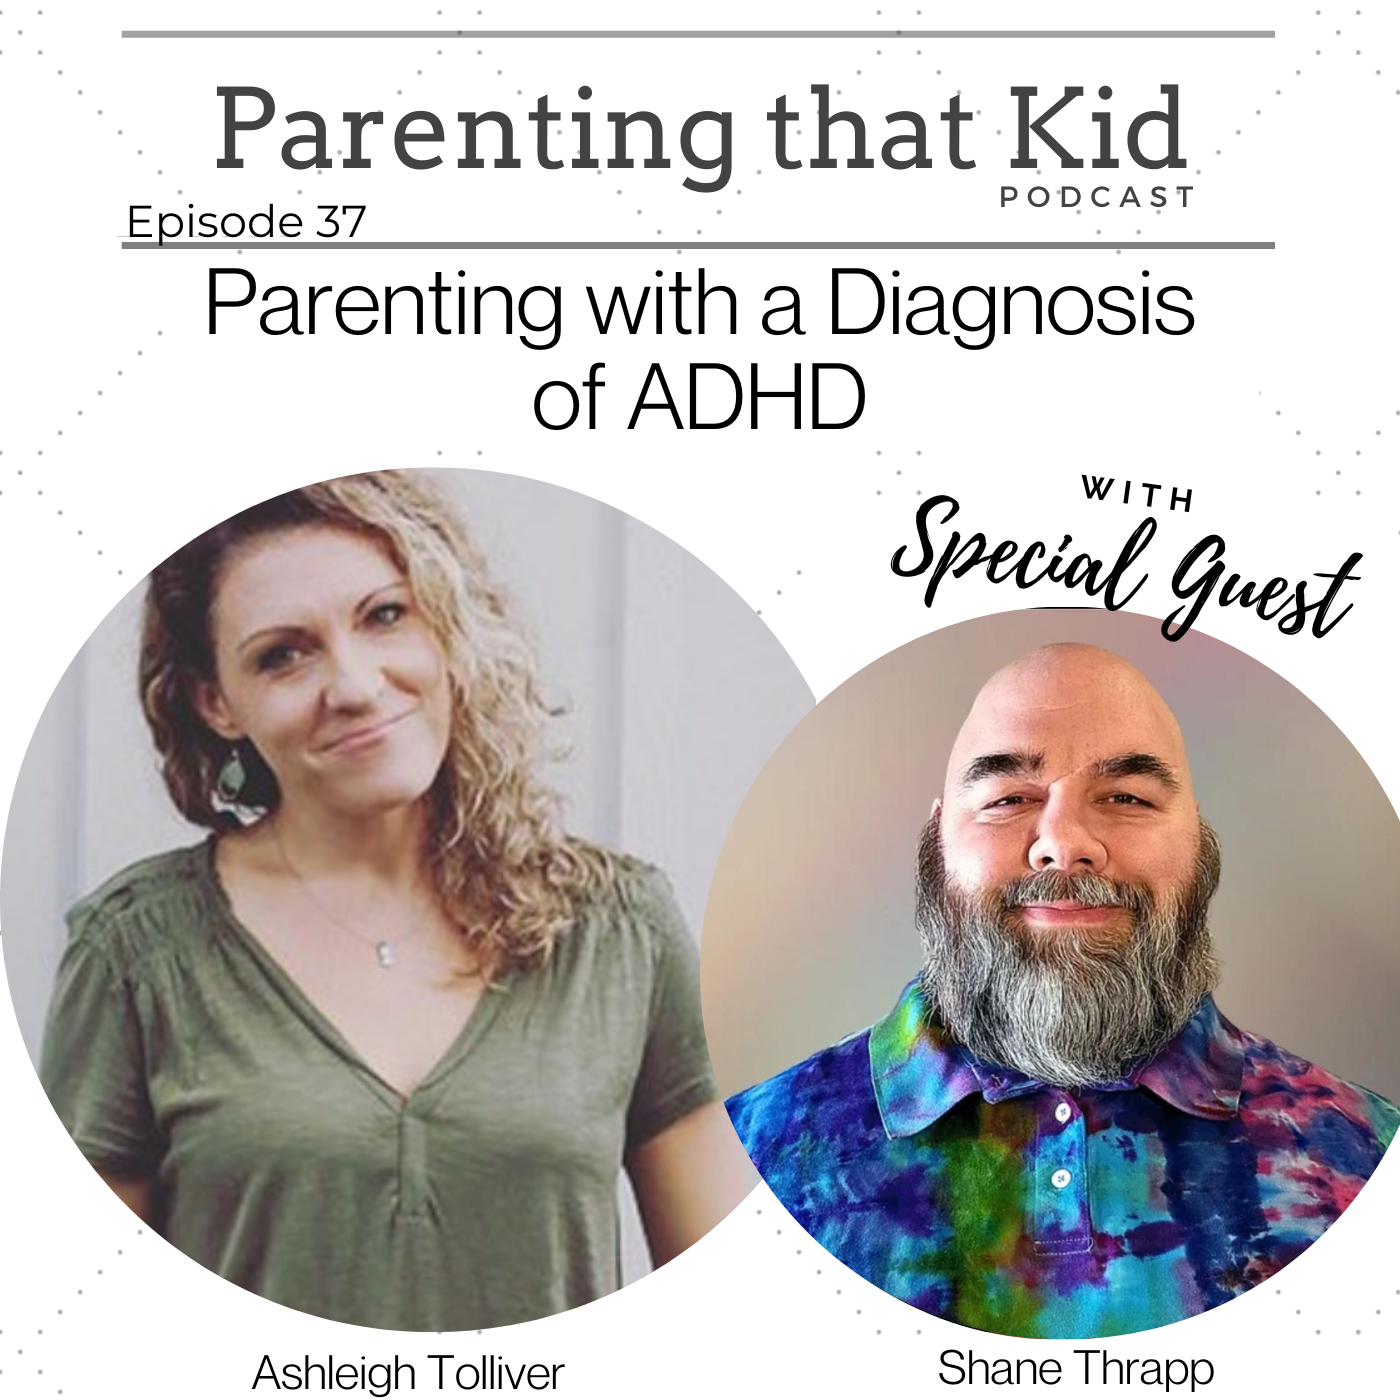 Parenting with a Diagnosis of ADHD with Shane Thrapp